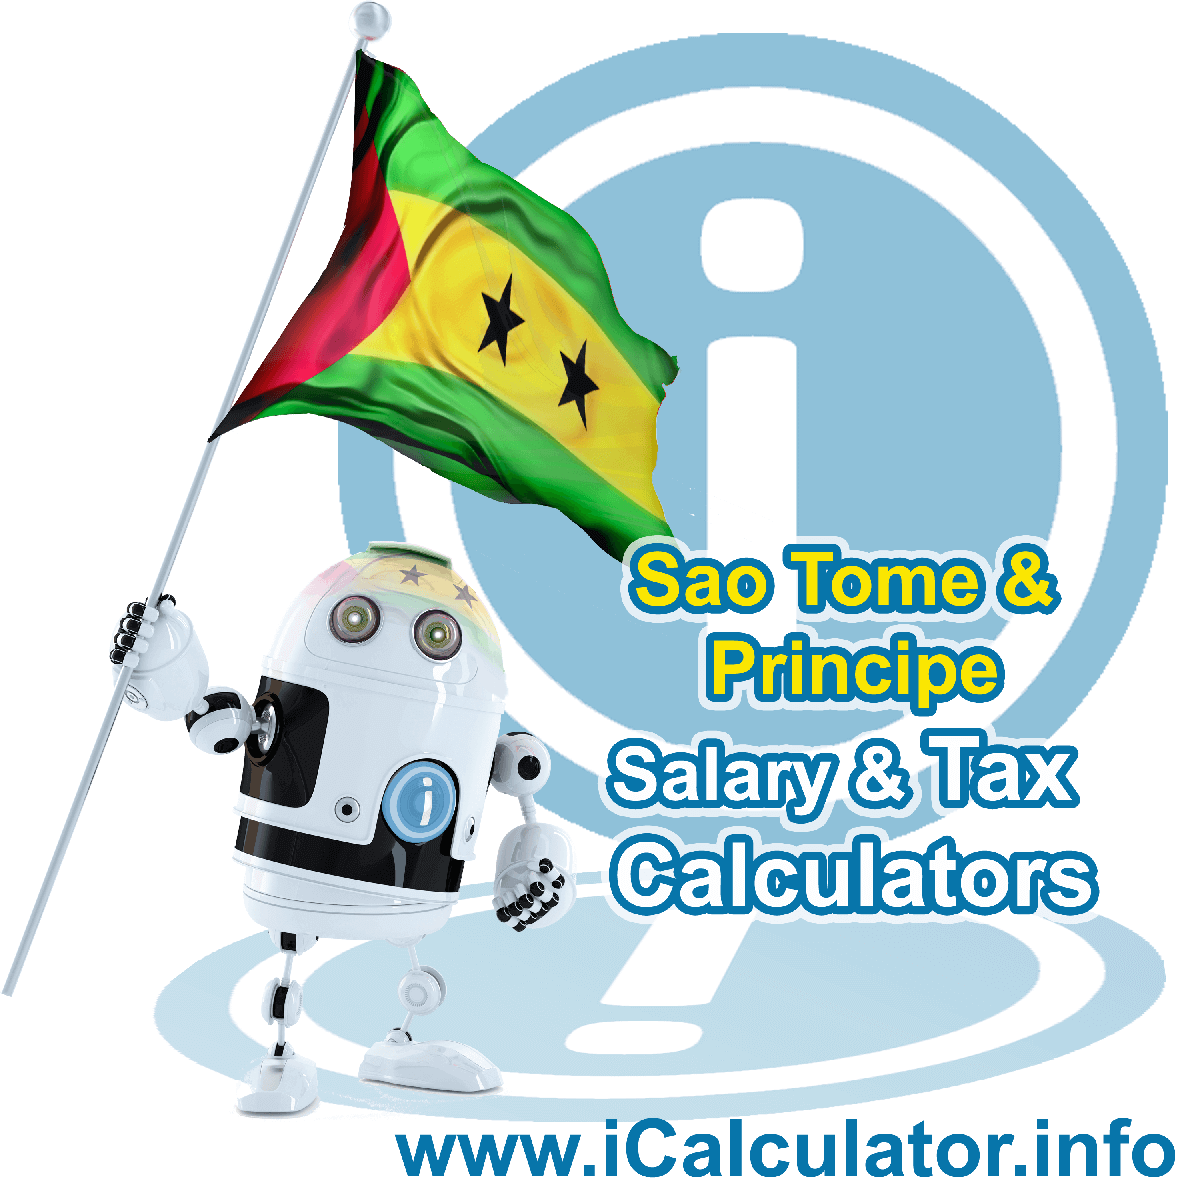 Sao Tome And Principe Salary Calculator. This image shows the Sao Tome And Principeese flag and information relating to the tax formula for the Sao Tome And Principe Tax Calculator